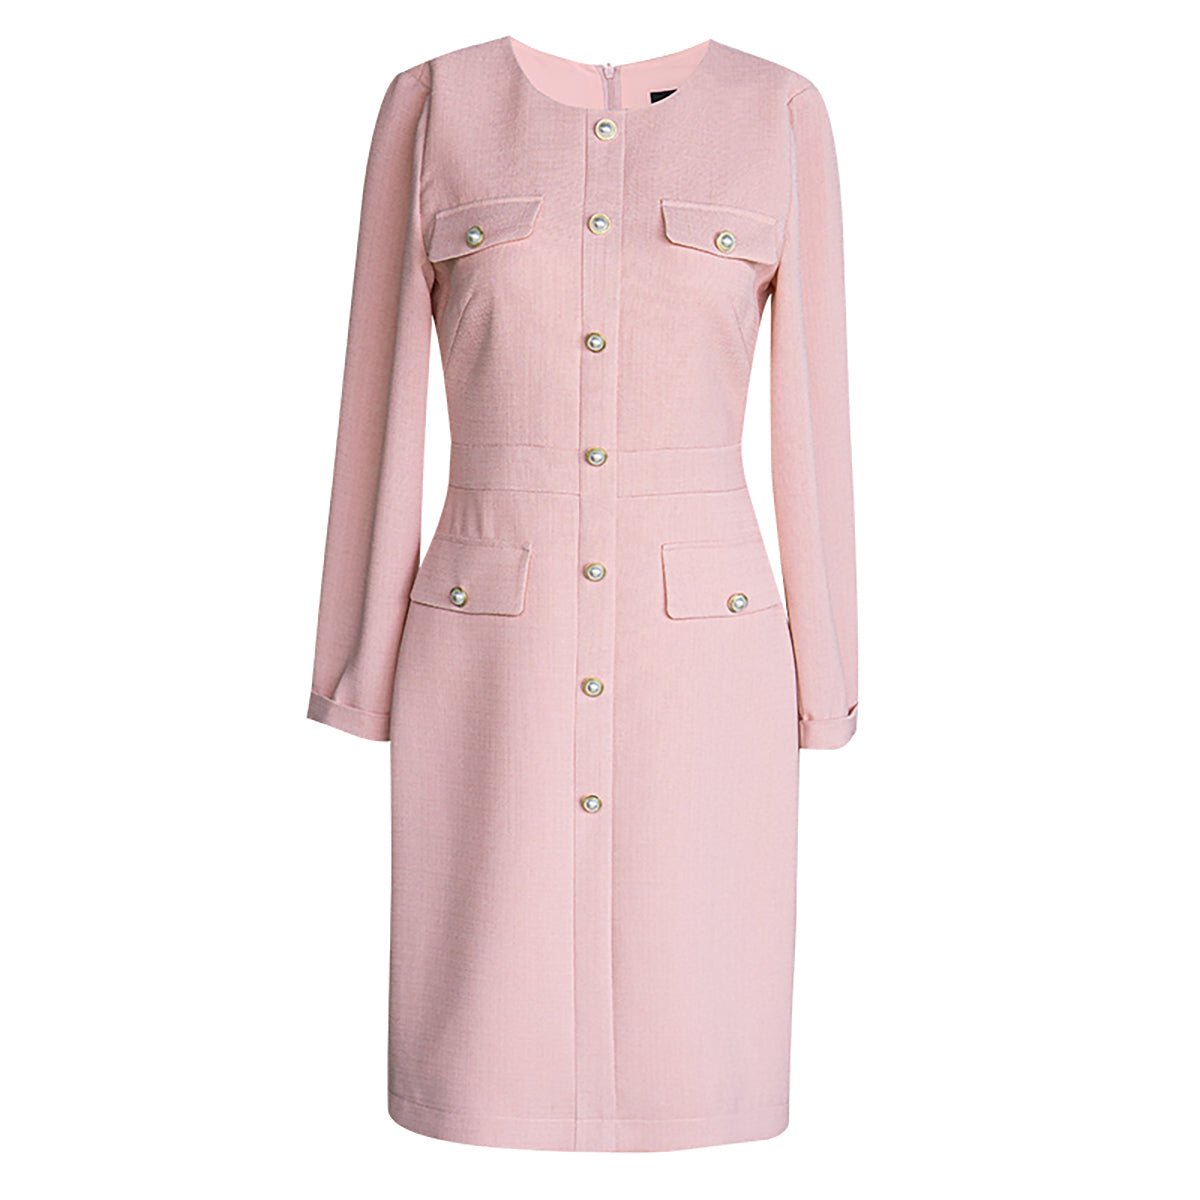 Chic Buttoned Pink Dress - 0cm